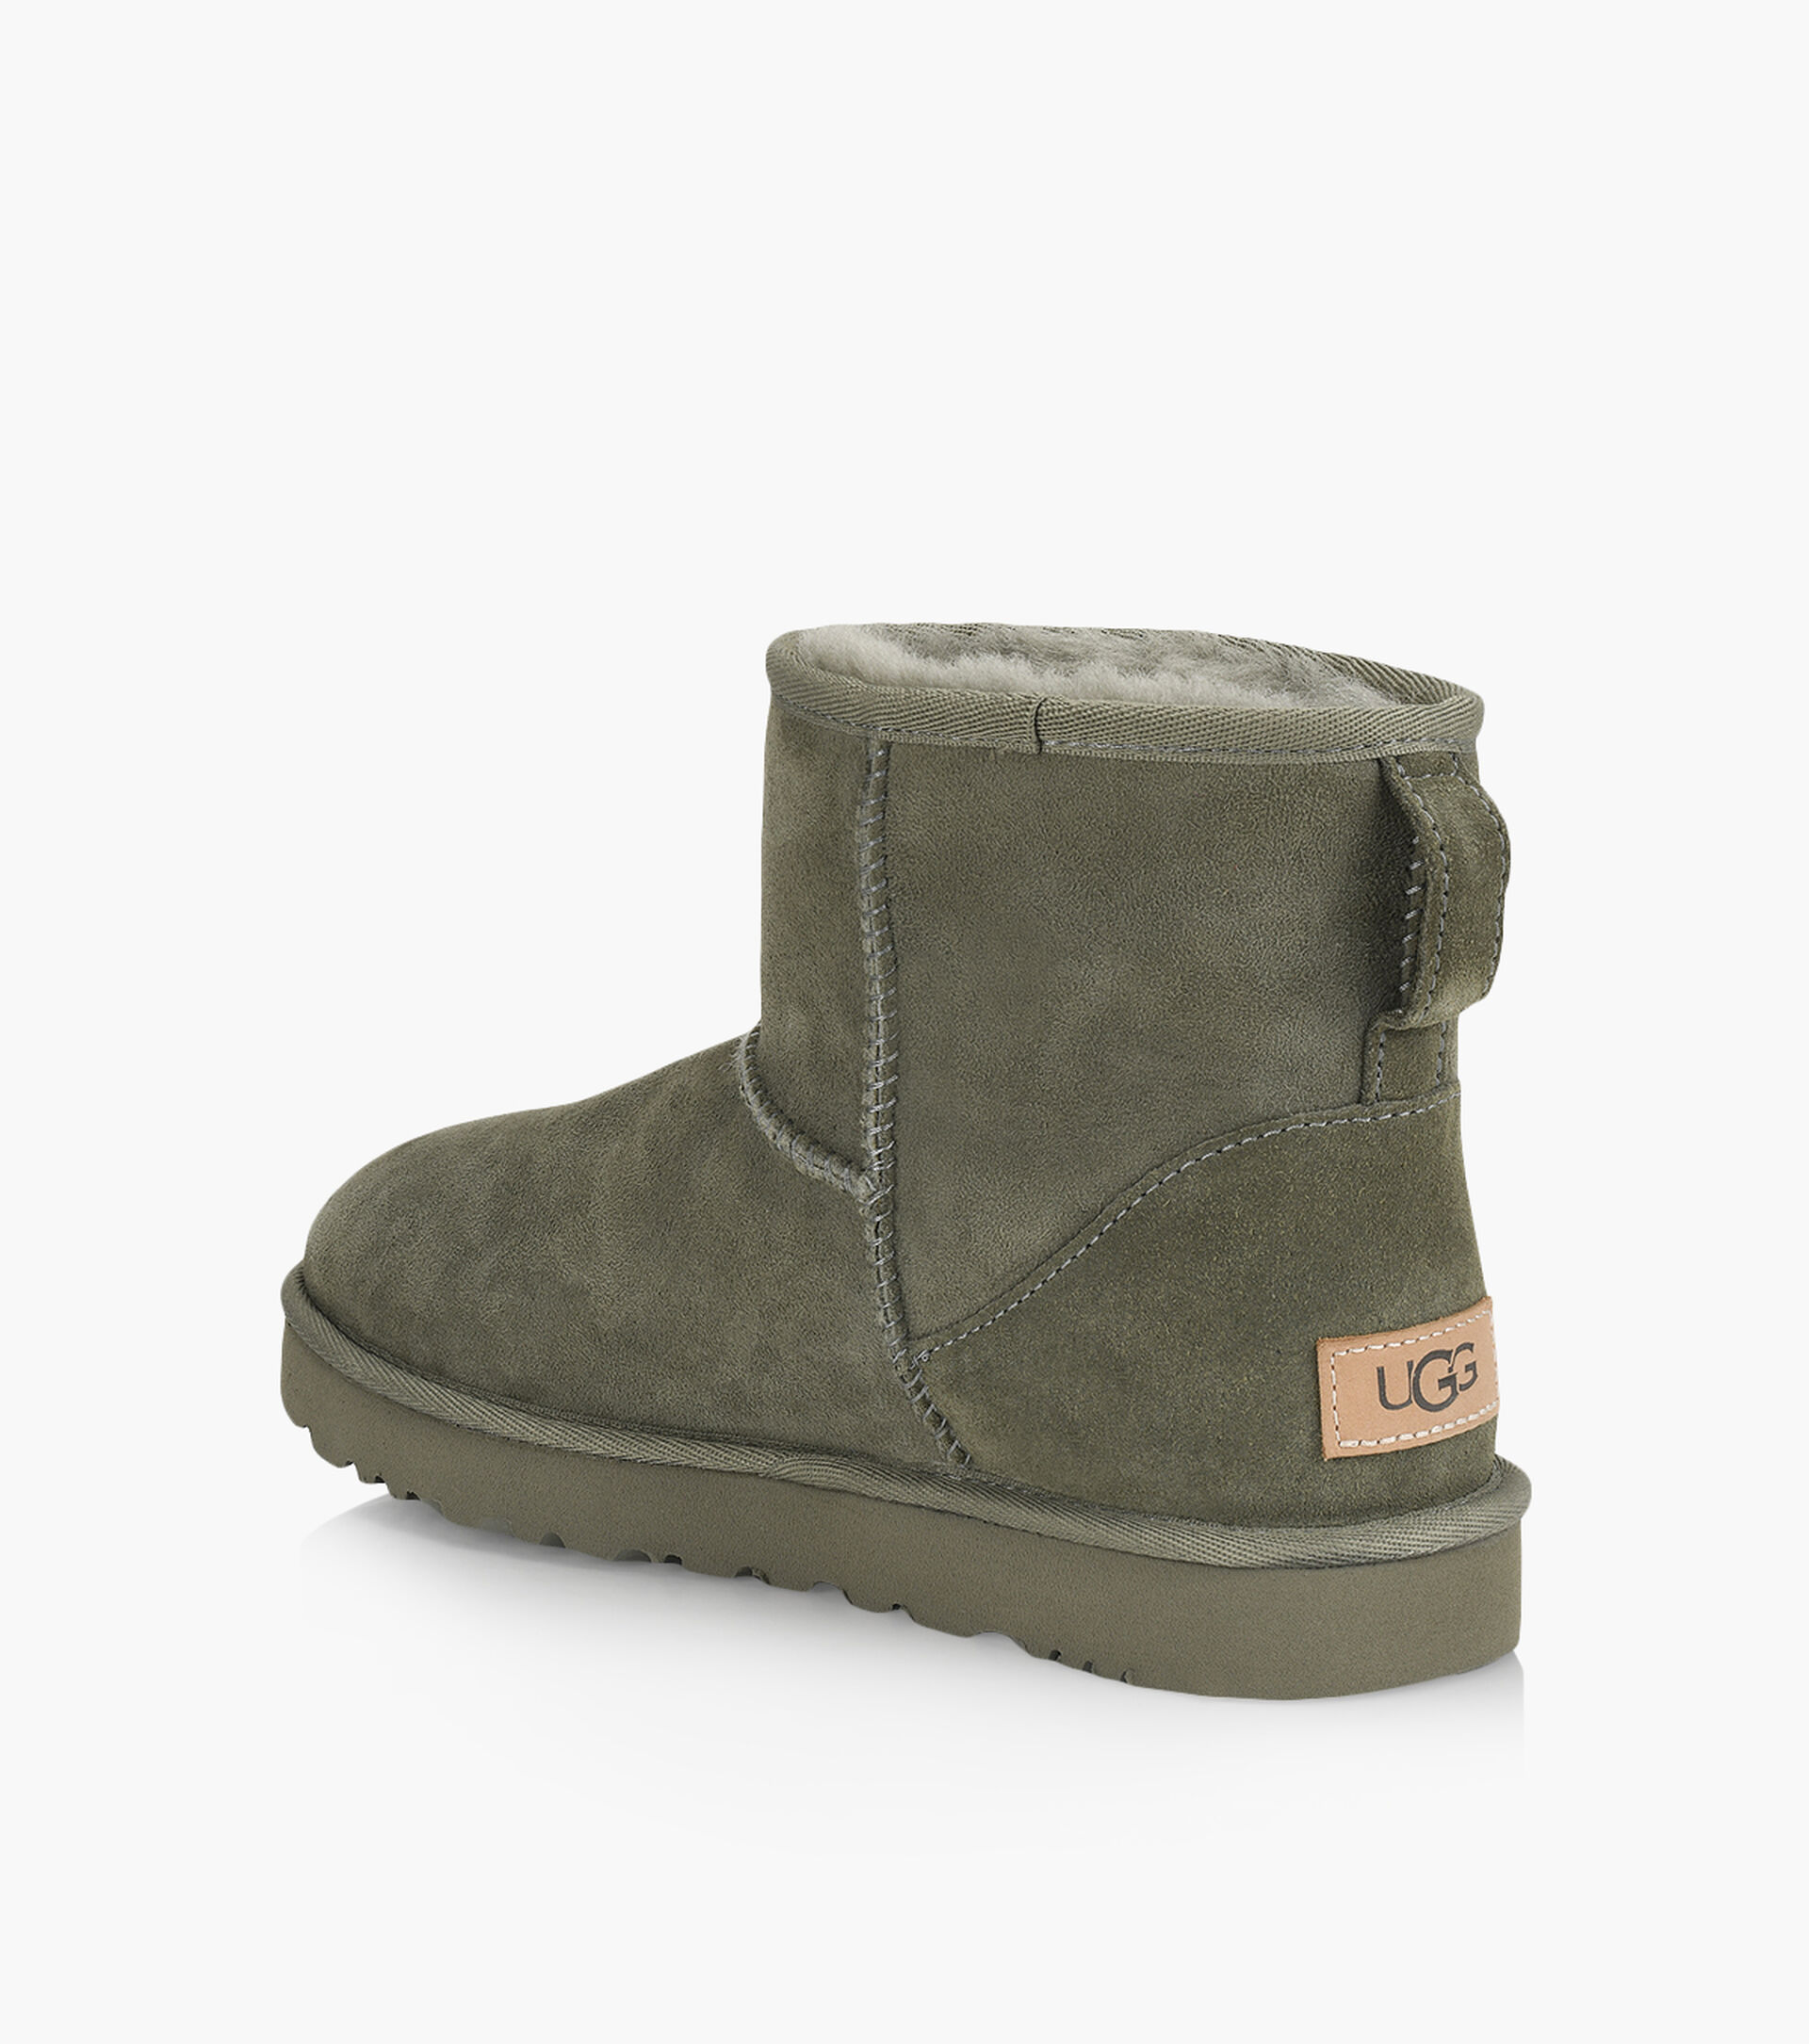 UGG CLASSIC MINI II - Suede | Browns Shoes